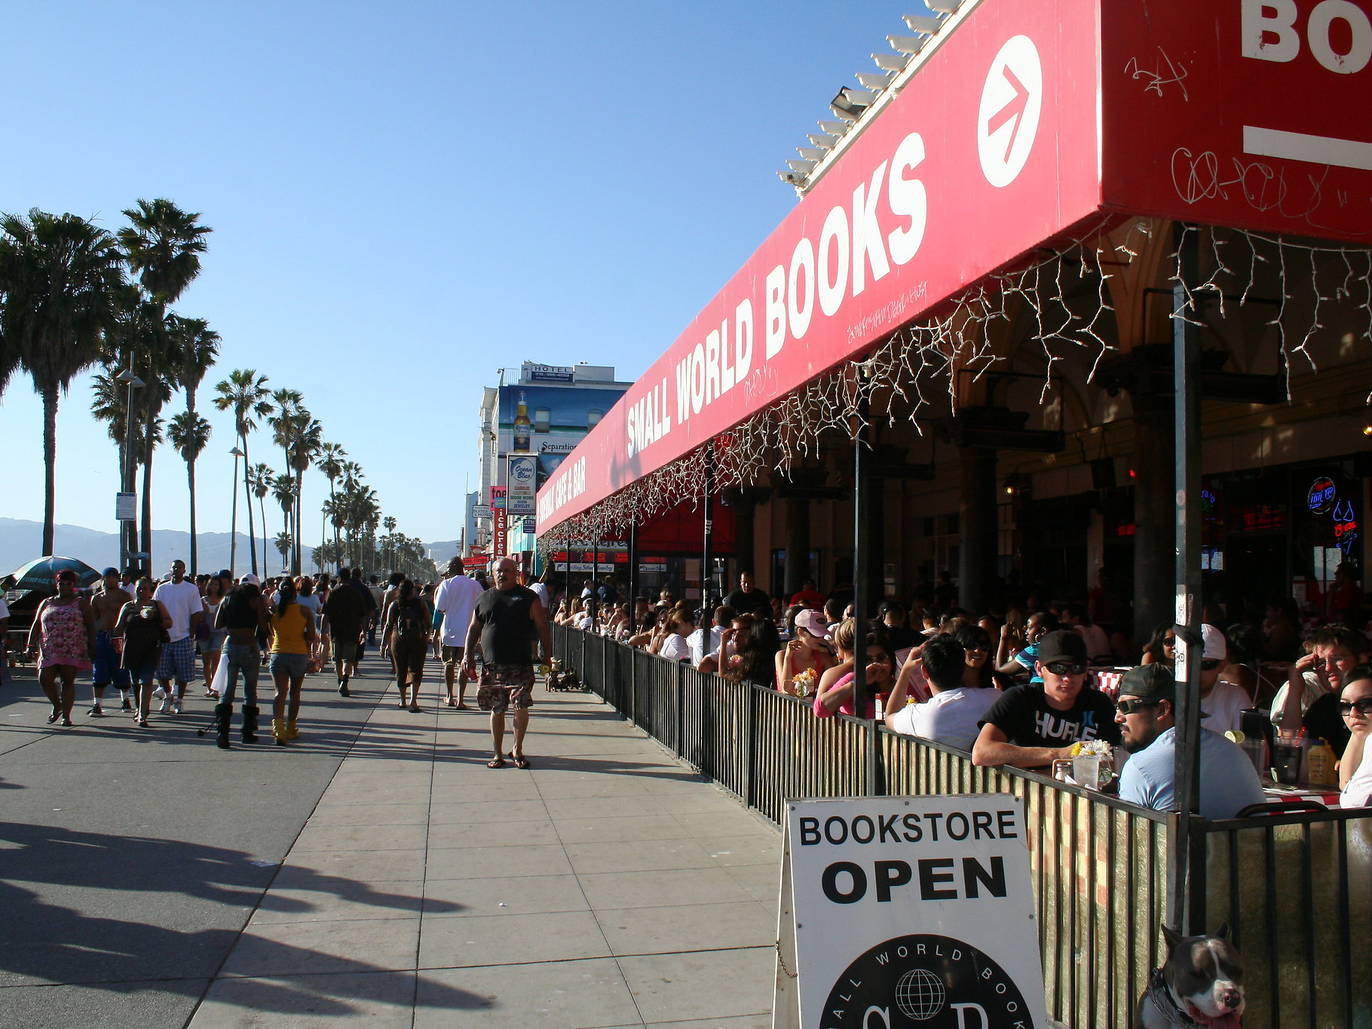 7 Best Things to Do in Venice Beach When Exploring the Boardwalk